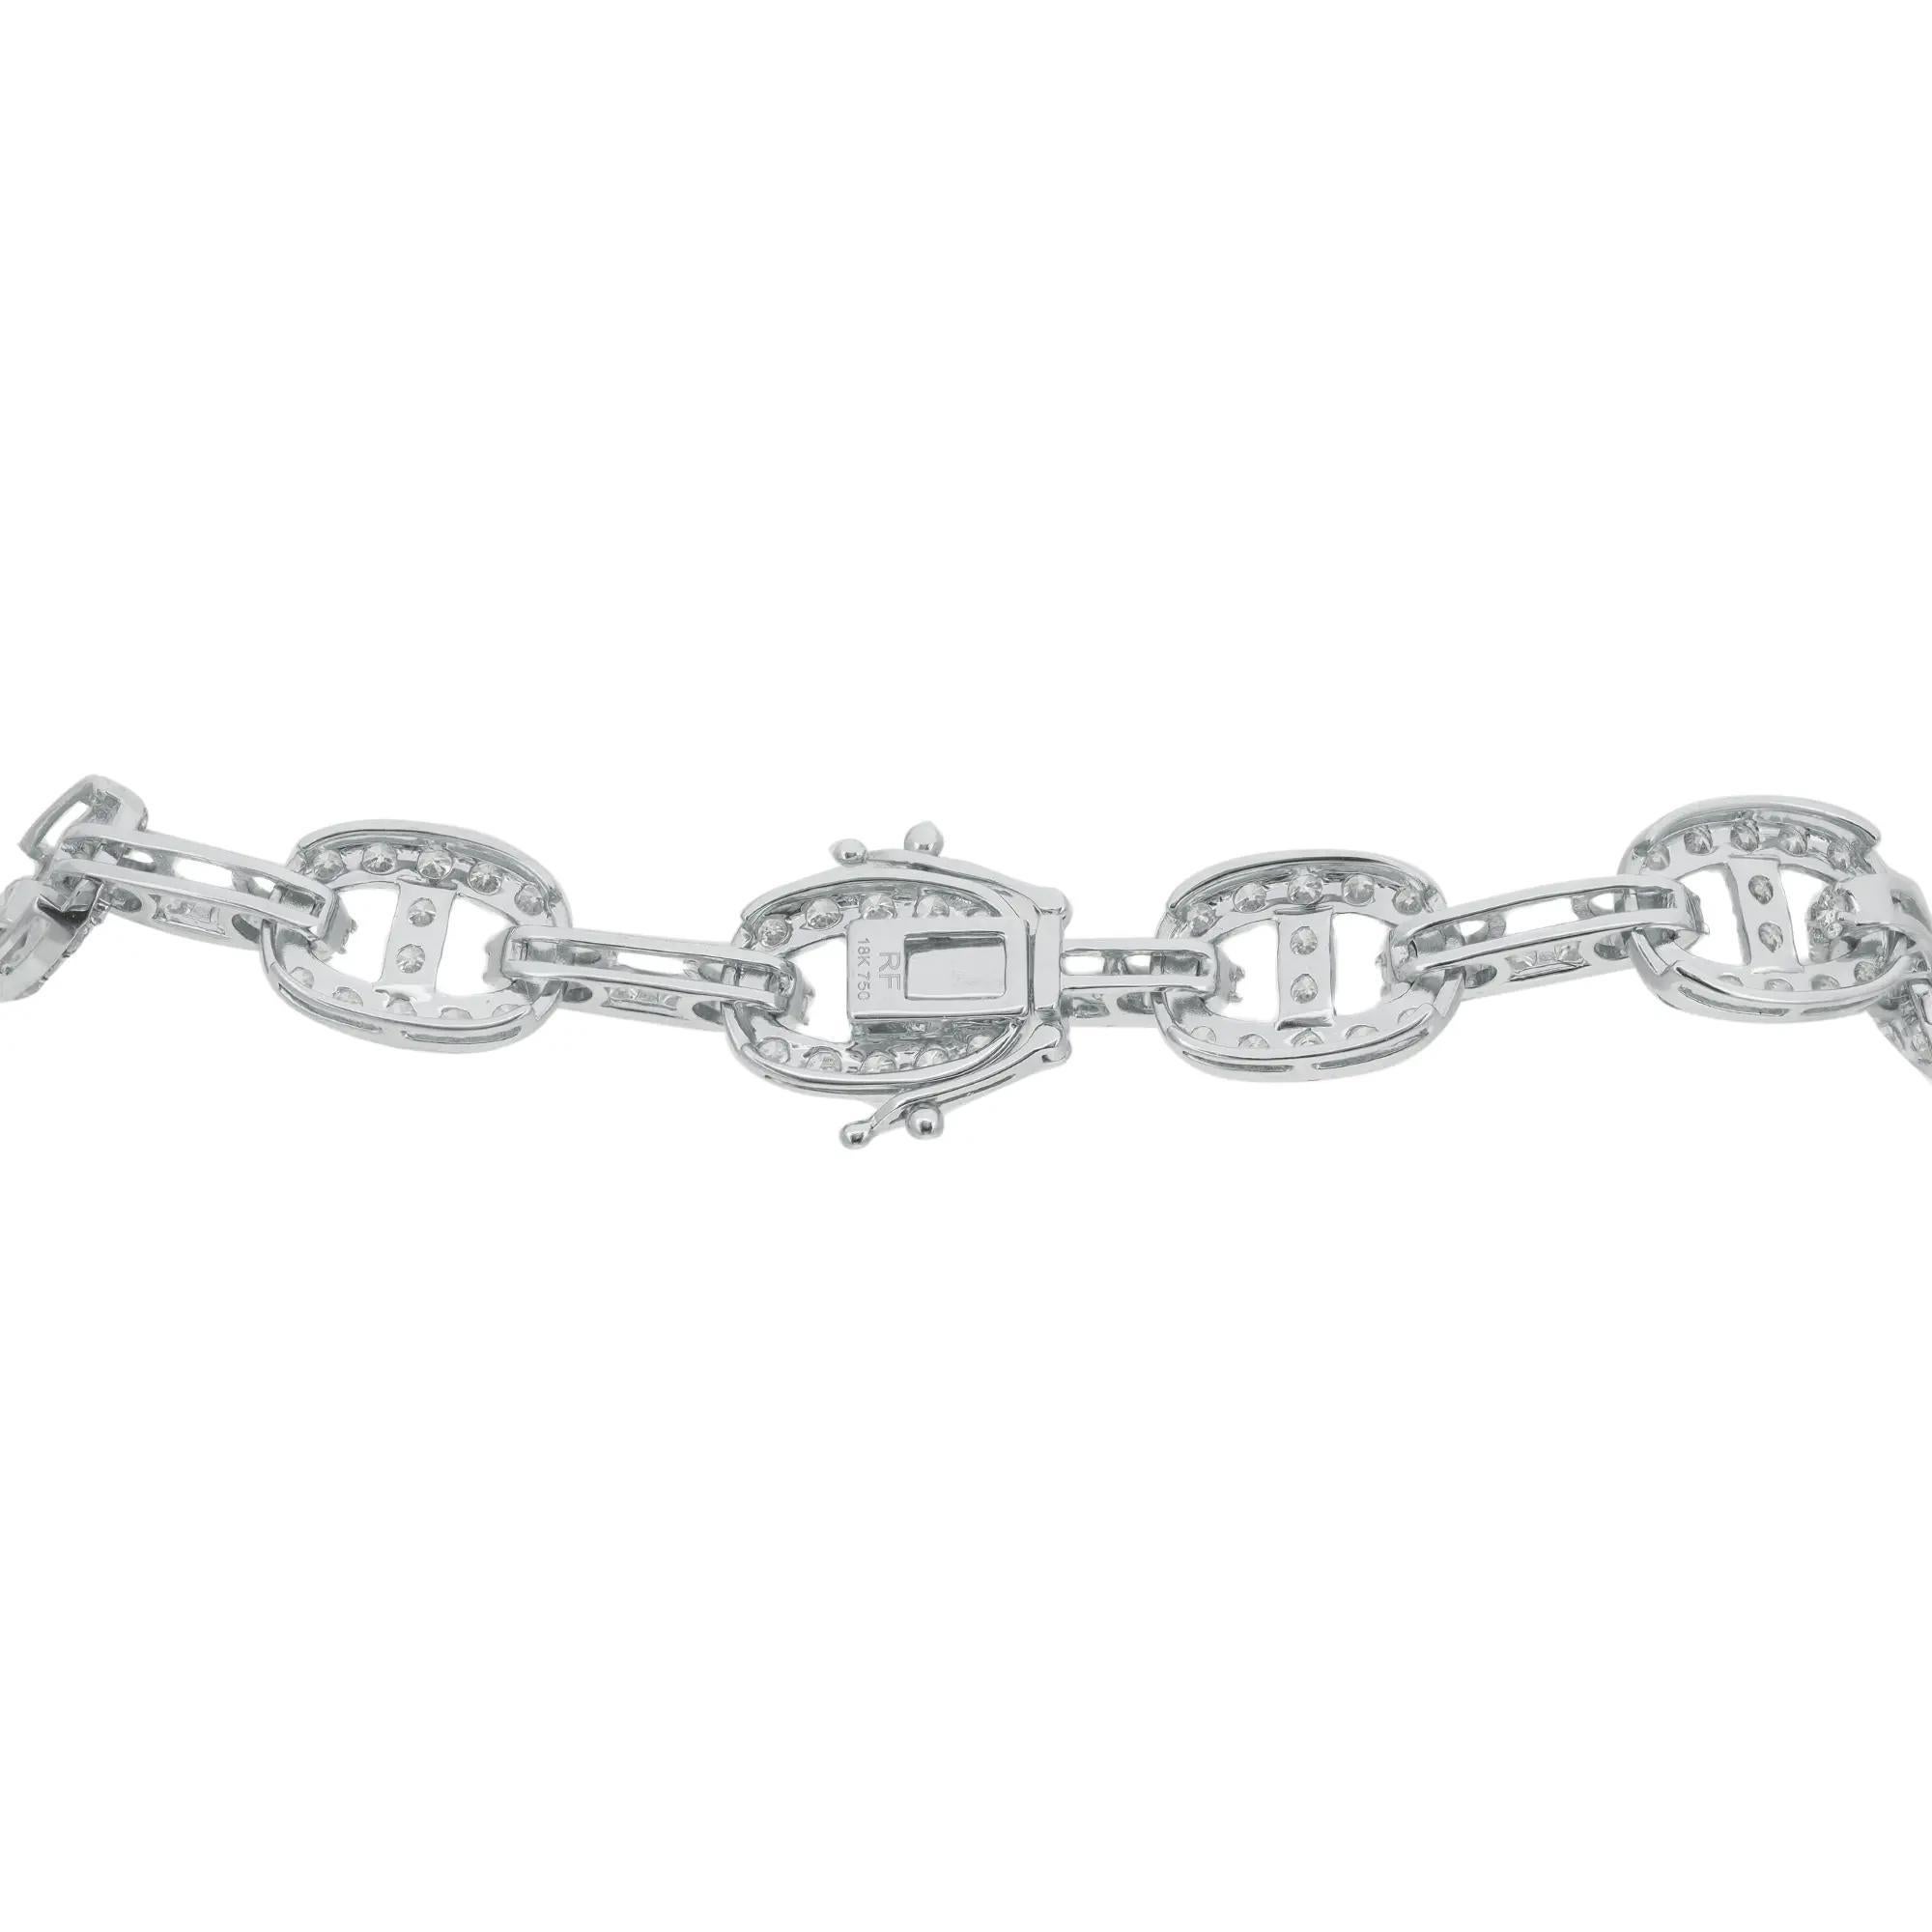 Modern Round Cut Diamond Link Chain Necklace 18K White Gold 14.96Cttw 17.5 Inches For Sale